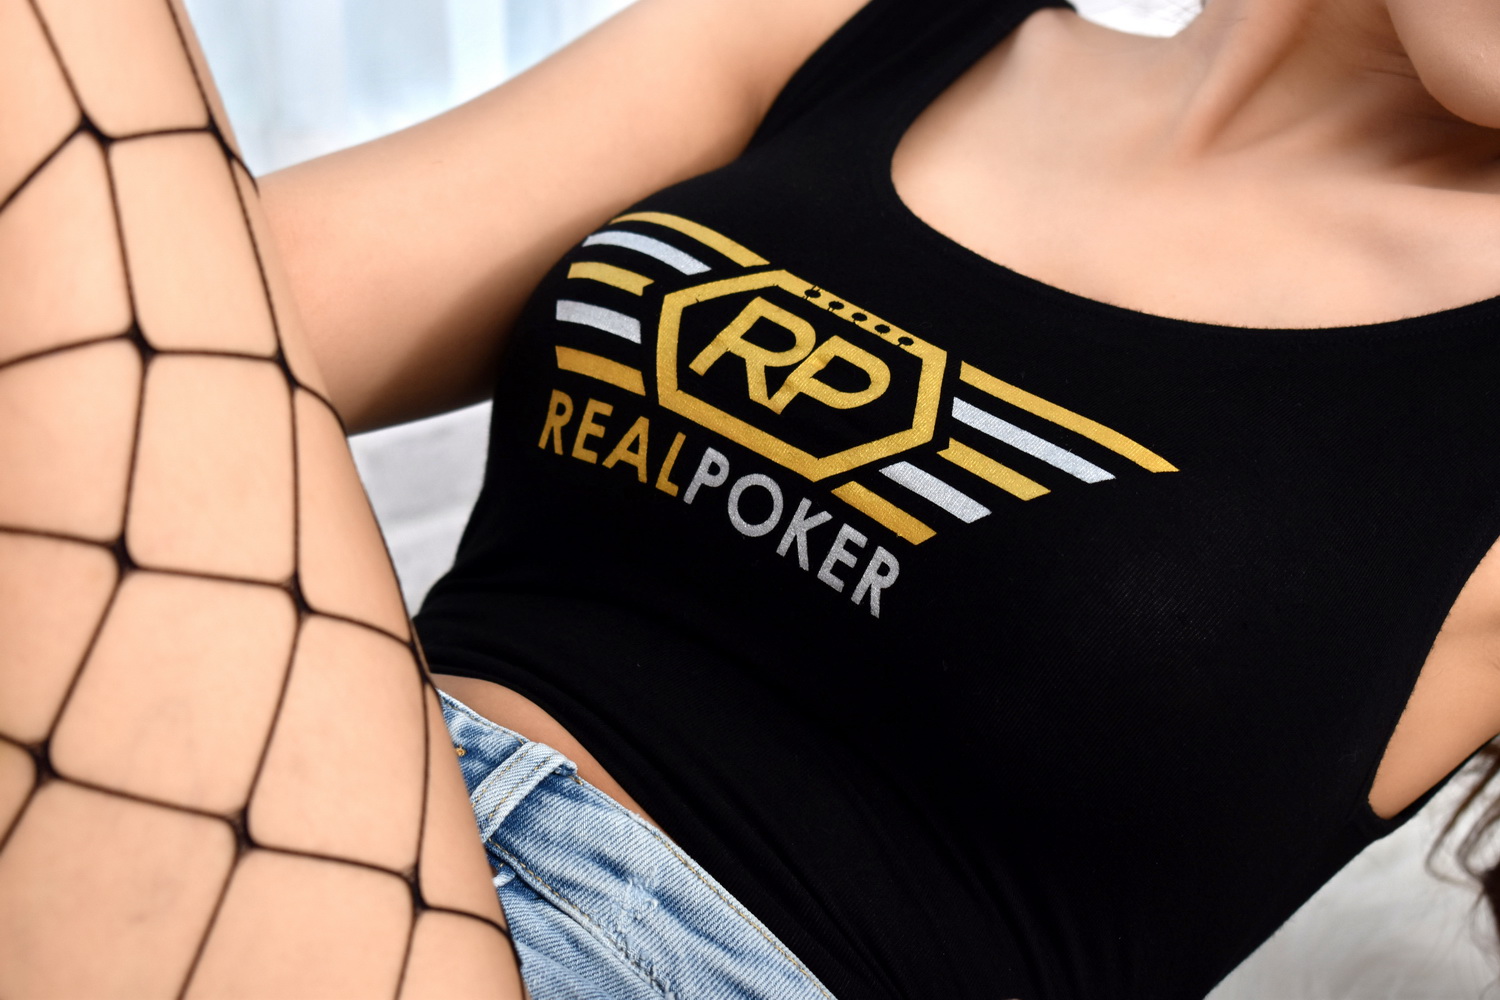 Real Poker Stores